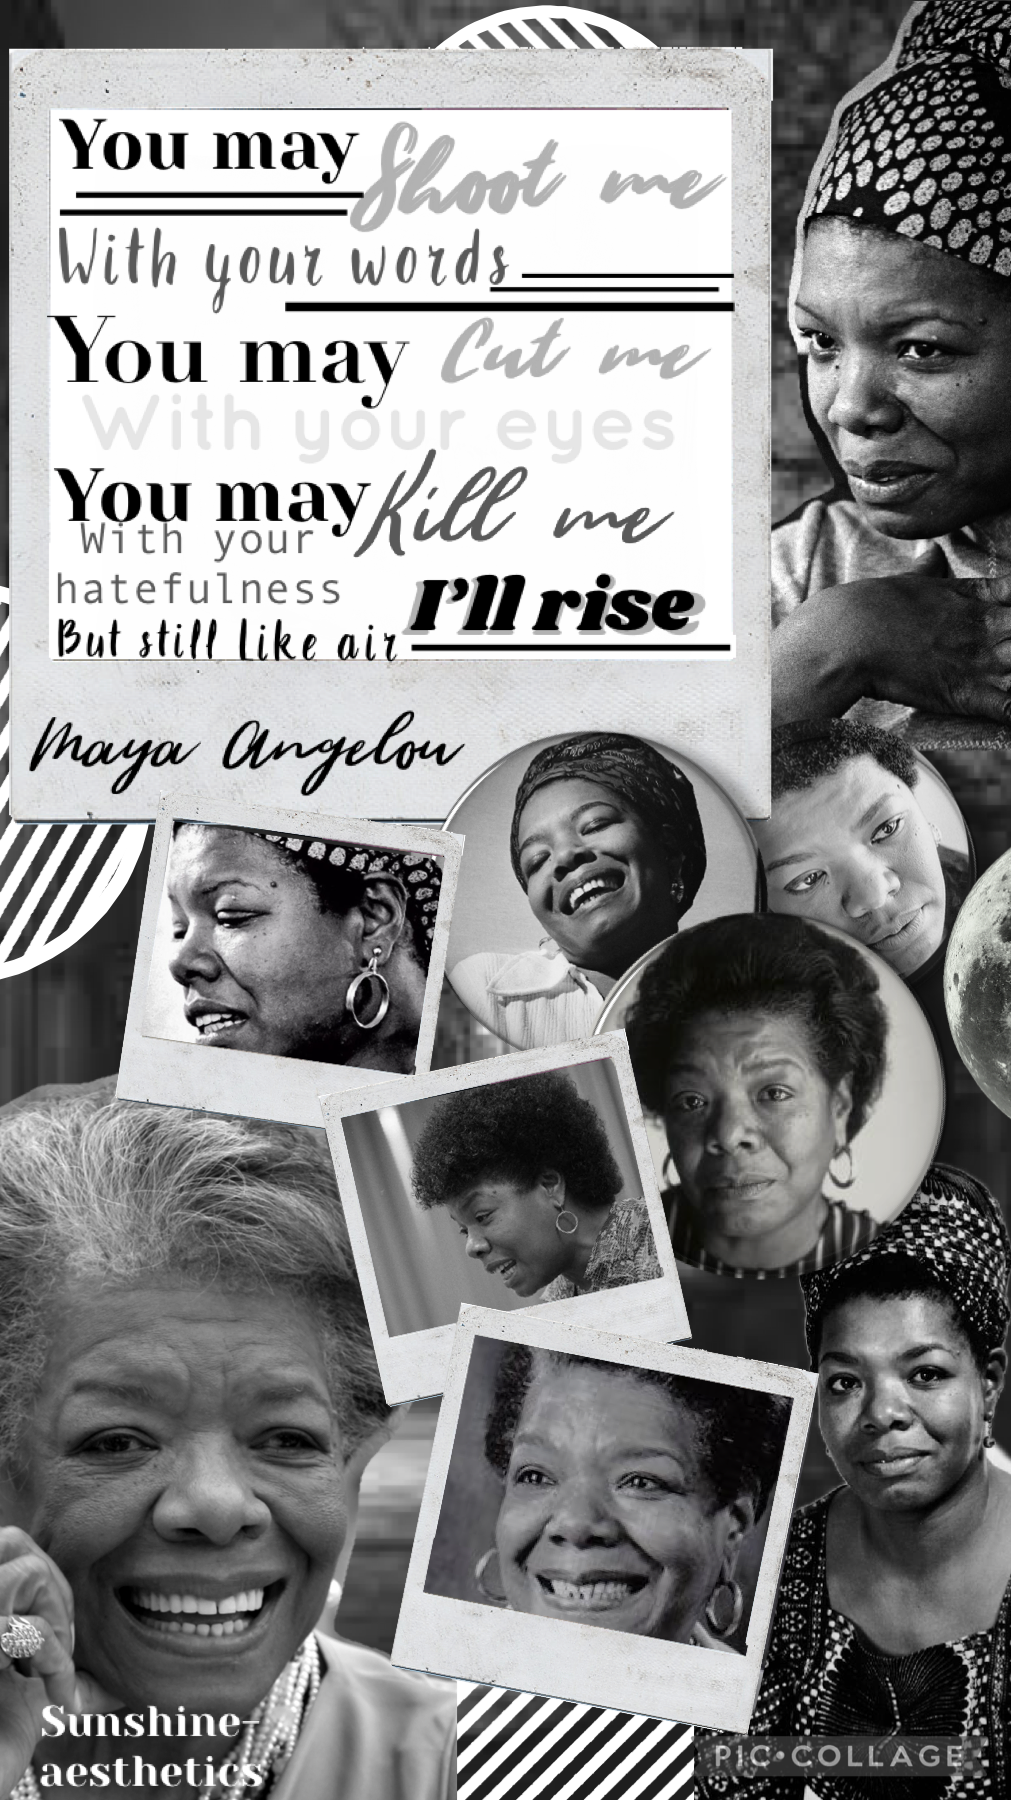 ✊🏾Black history month (tap)✊🏾
Maya Angelou collage! this is part of the series by ocean aesthetics, hi check out her account if you haven’t! Also Check the remixes!! Have an amazing day!❤️